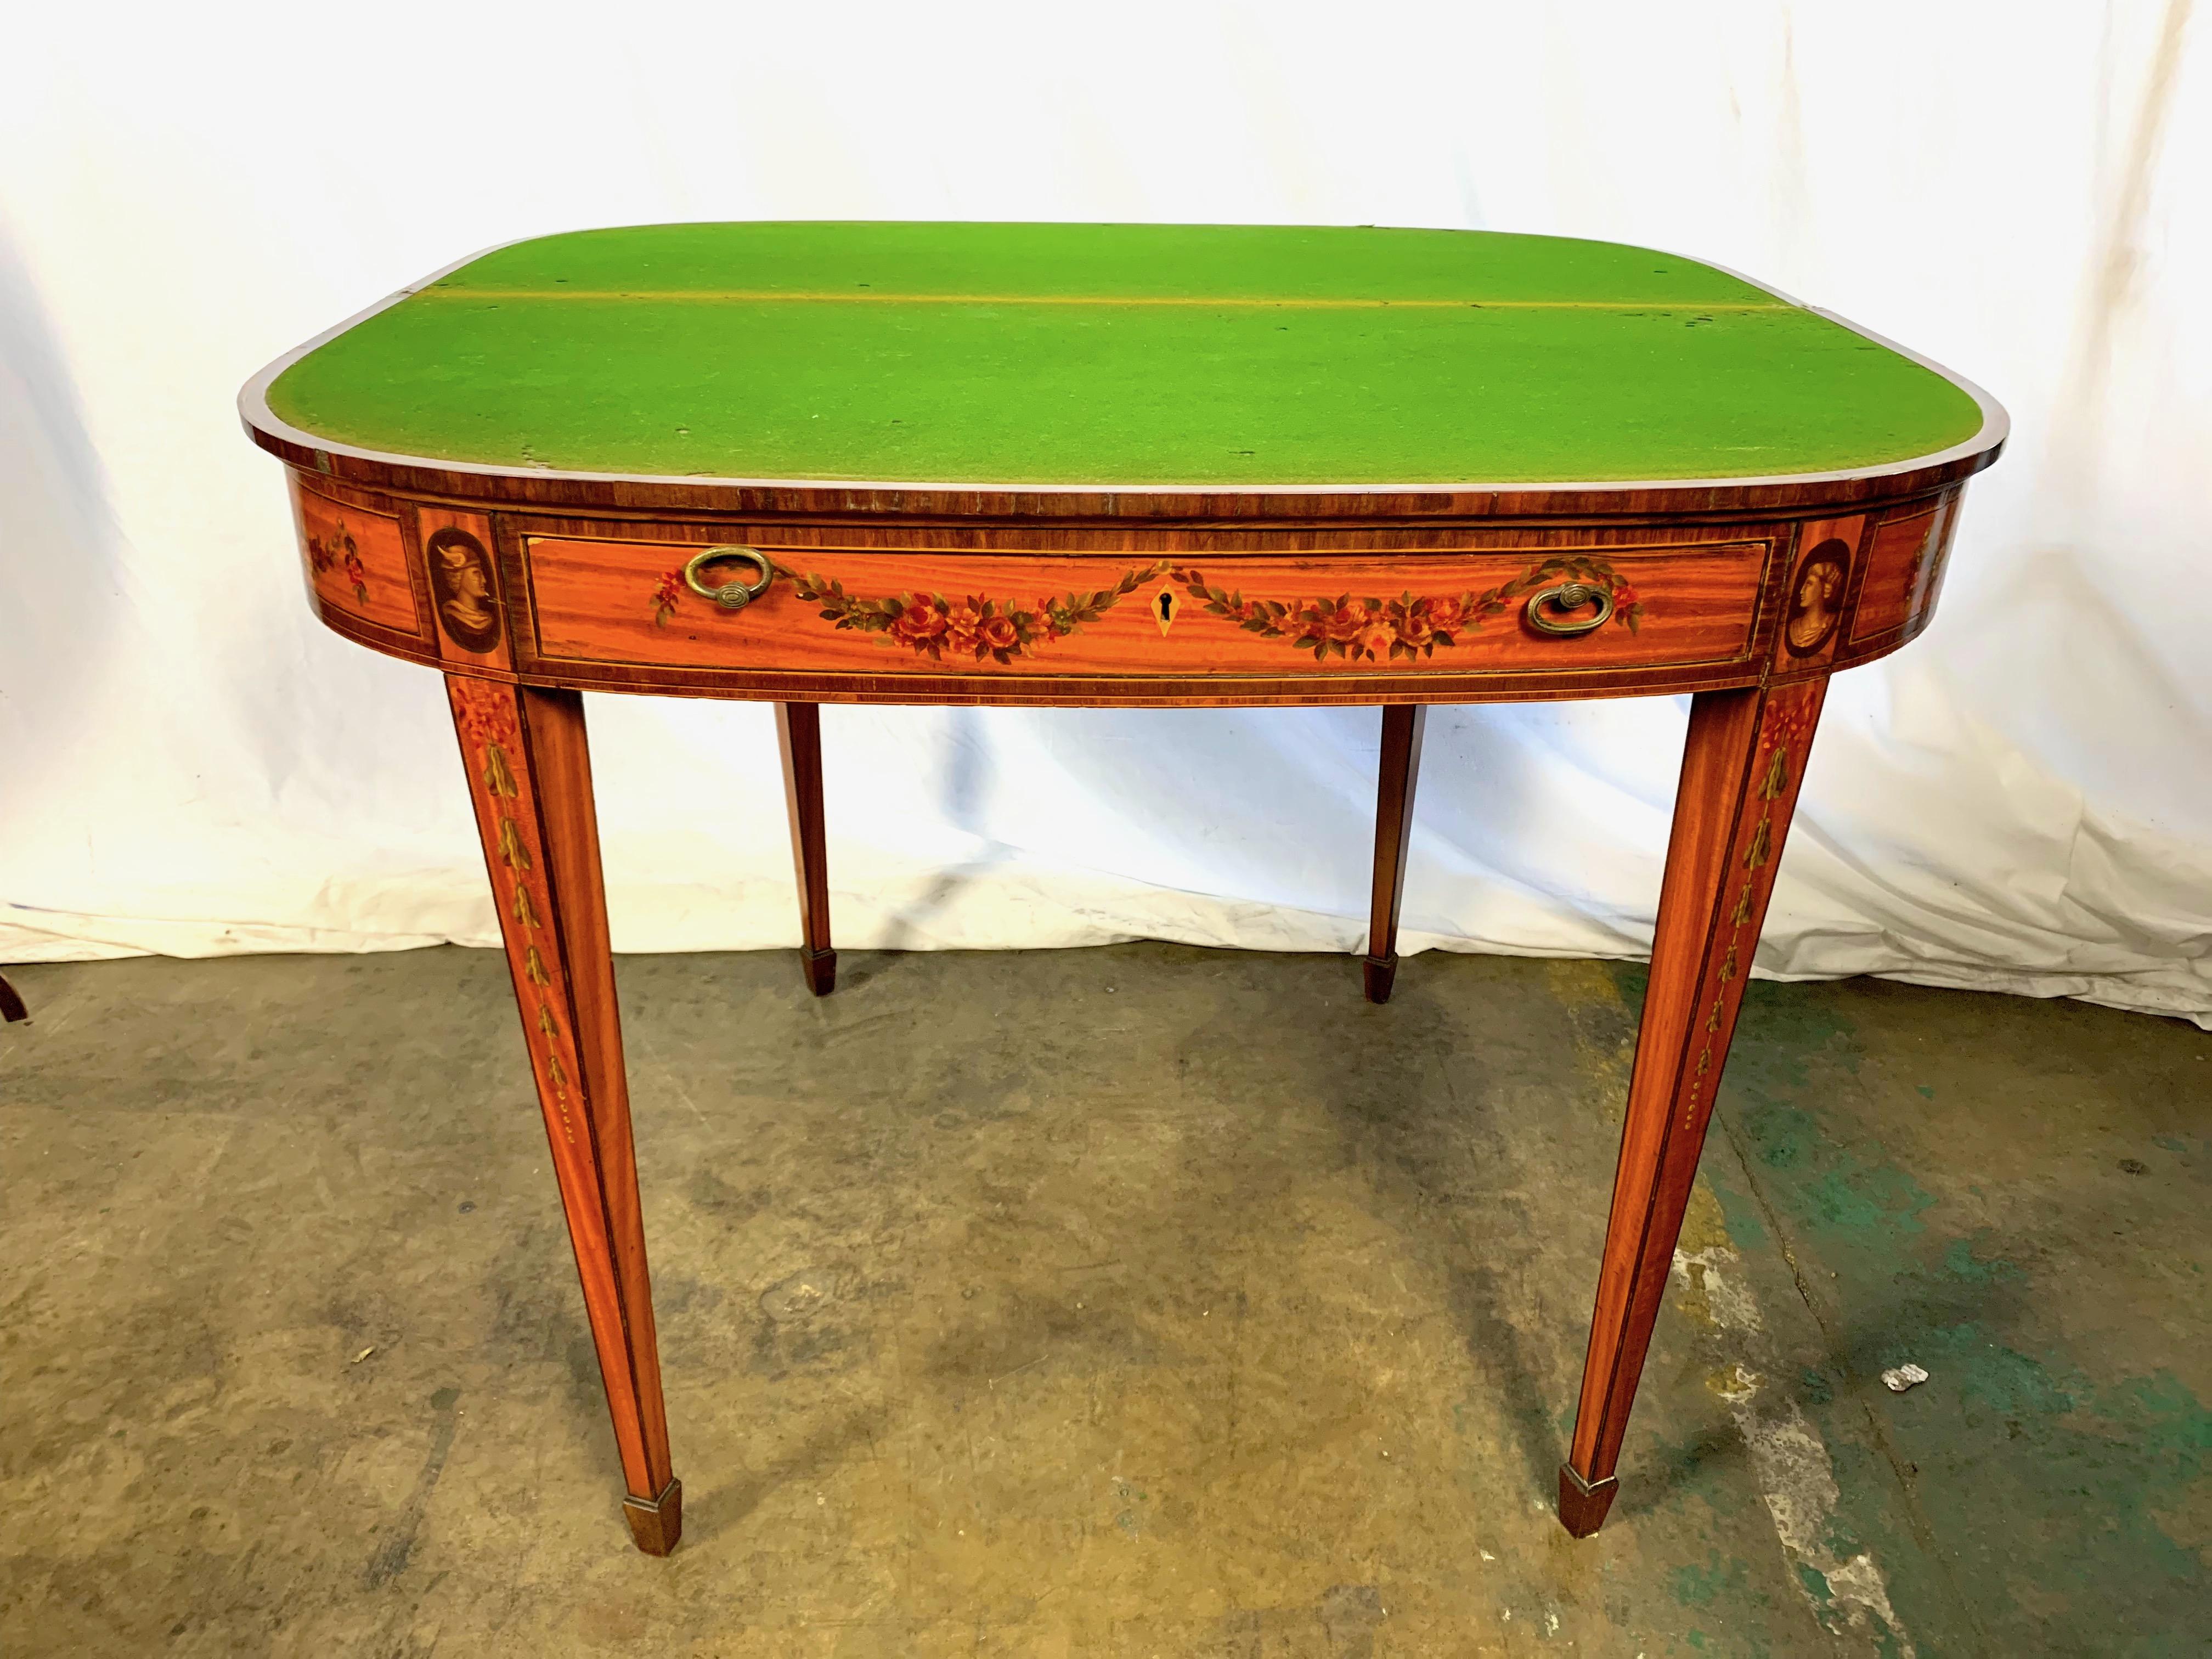 A particularly fine, Victorian, satinwood demilune card table with finely painted foliage and cross banded with floral motifs and central plaque painted of a lady surrounded by Cherubs.